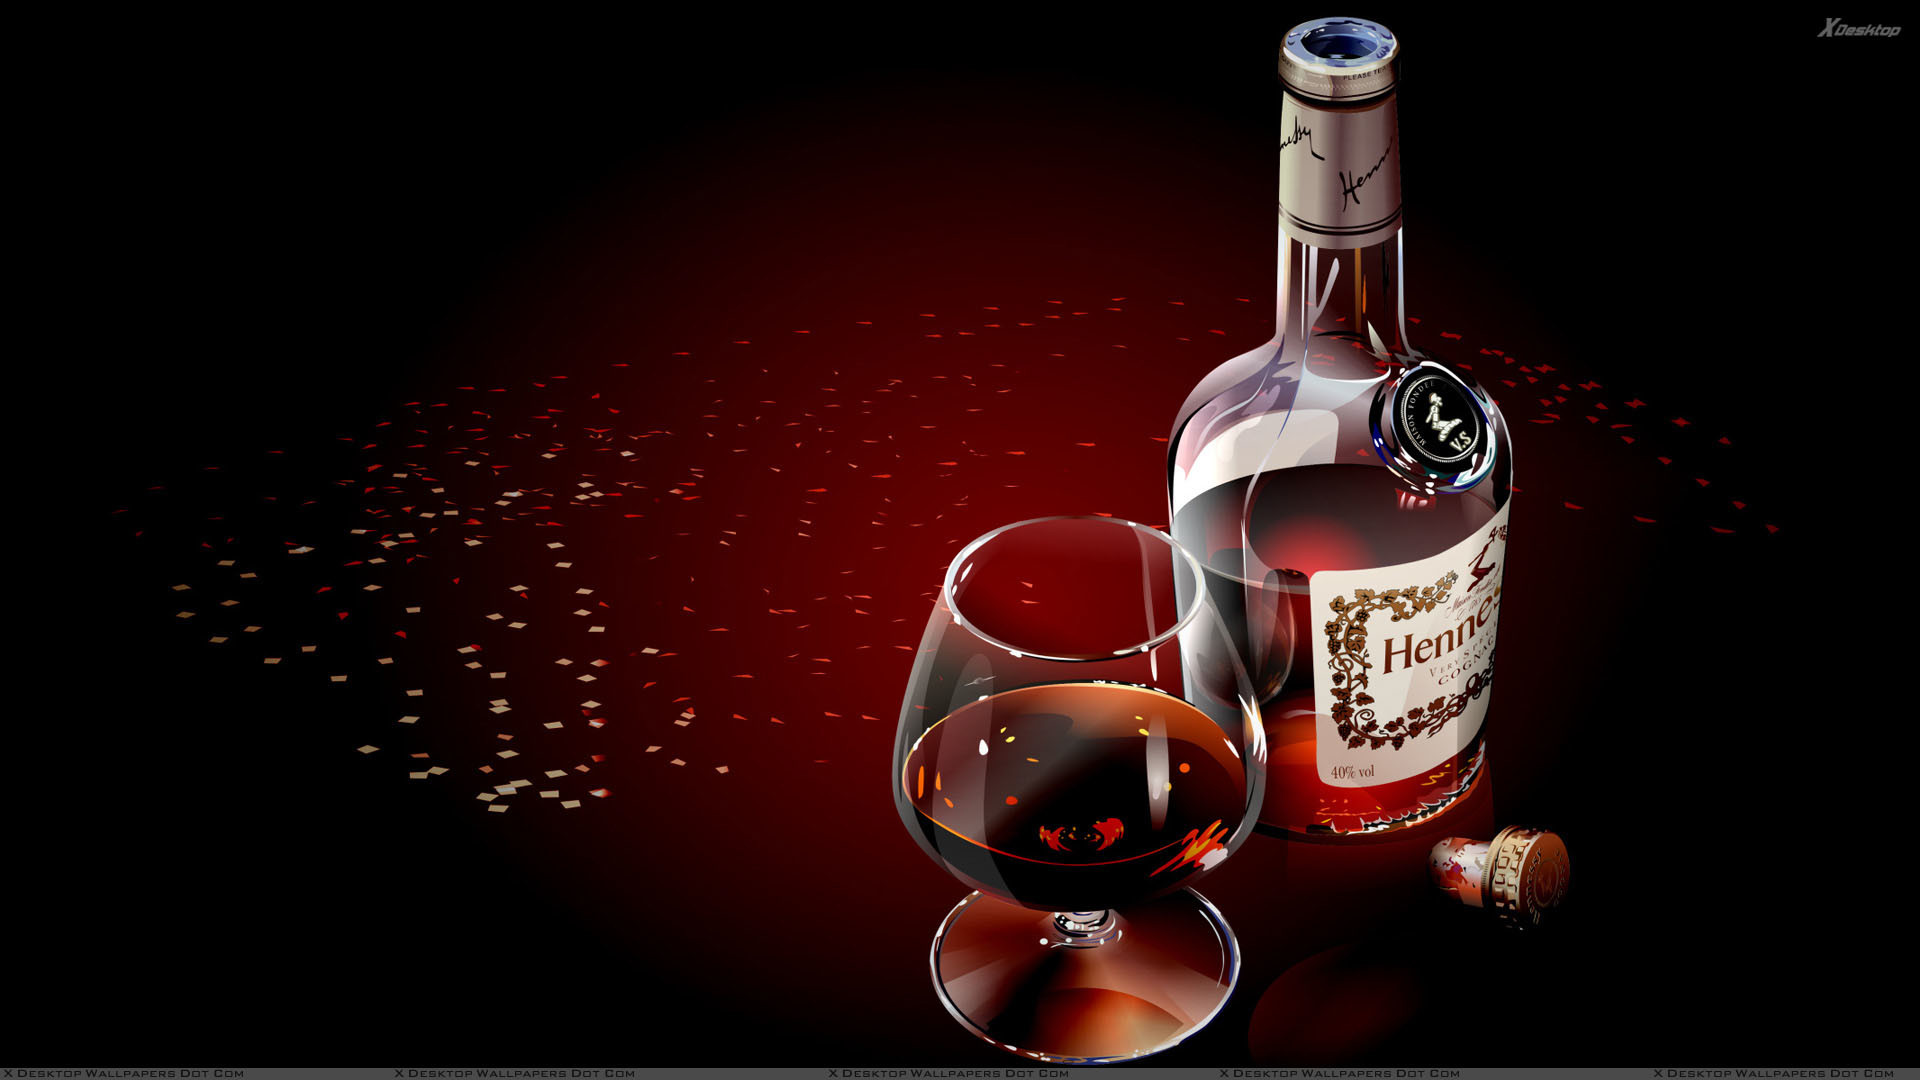 1920x1080 You are viewing wallpaper titled "Celebrate With Red Wine" ...